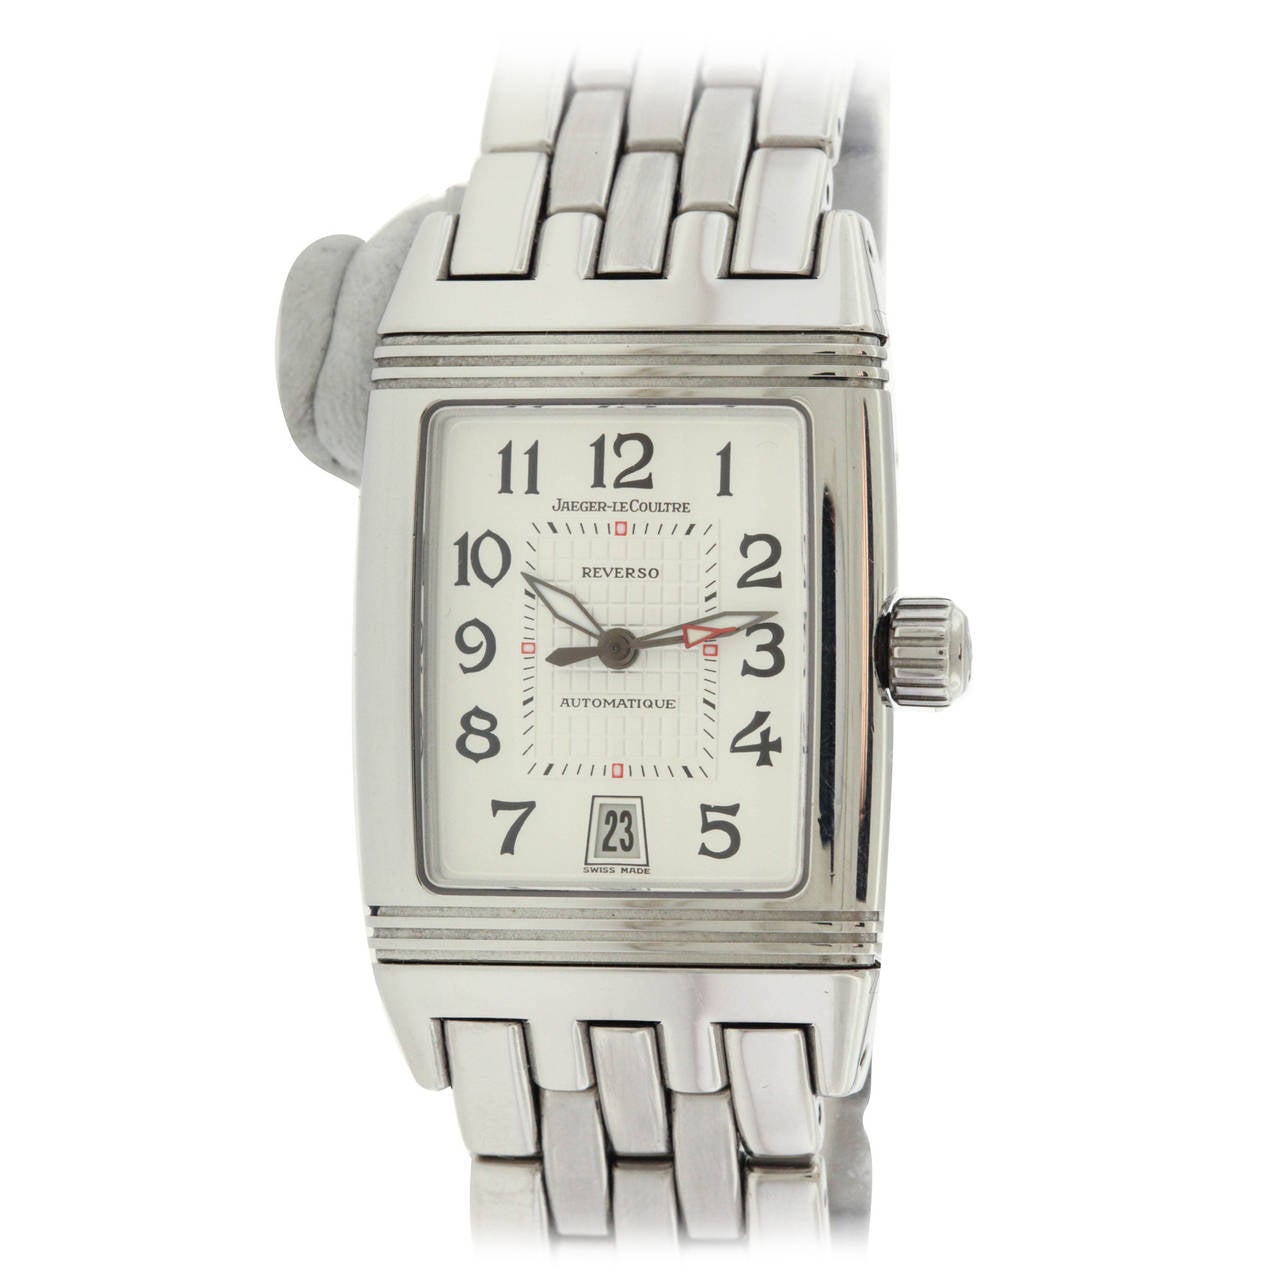 Jaeger LeCoultre Stainless Steel Gran' Sport Reverso Automatic Wristwatch